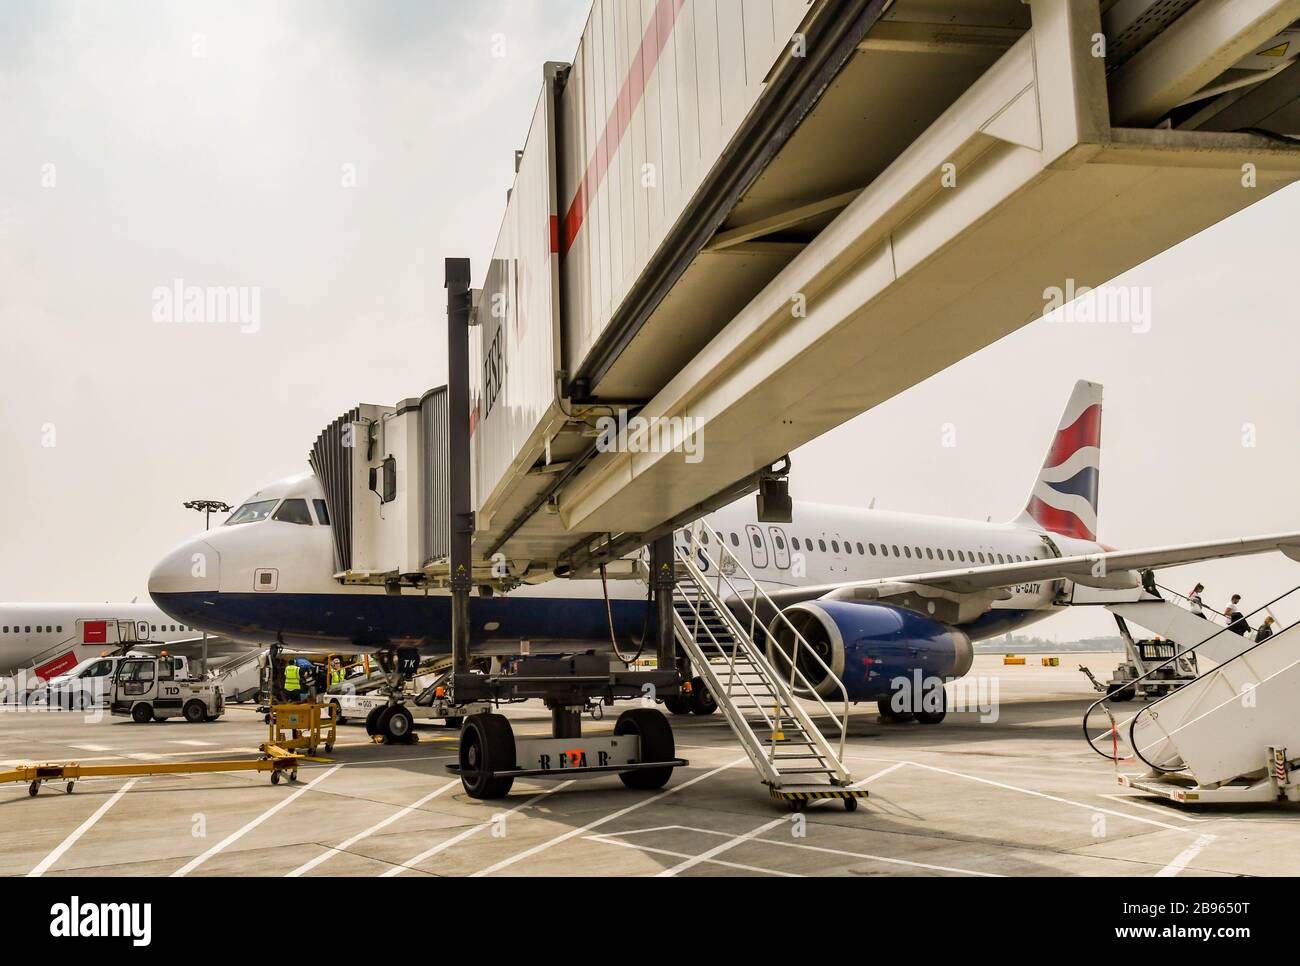 LONDON GATWICK AIRPORT, ENGLAND - APRIL 2019: British Airways Airbus jet attached to a jet bridge at London Gatwick Airport Stock Photo